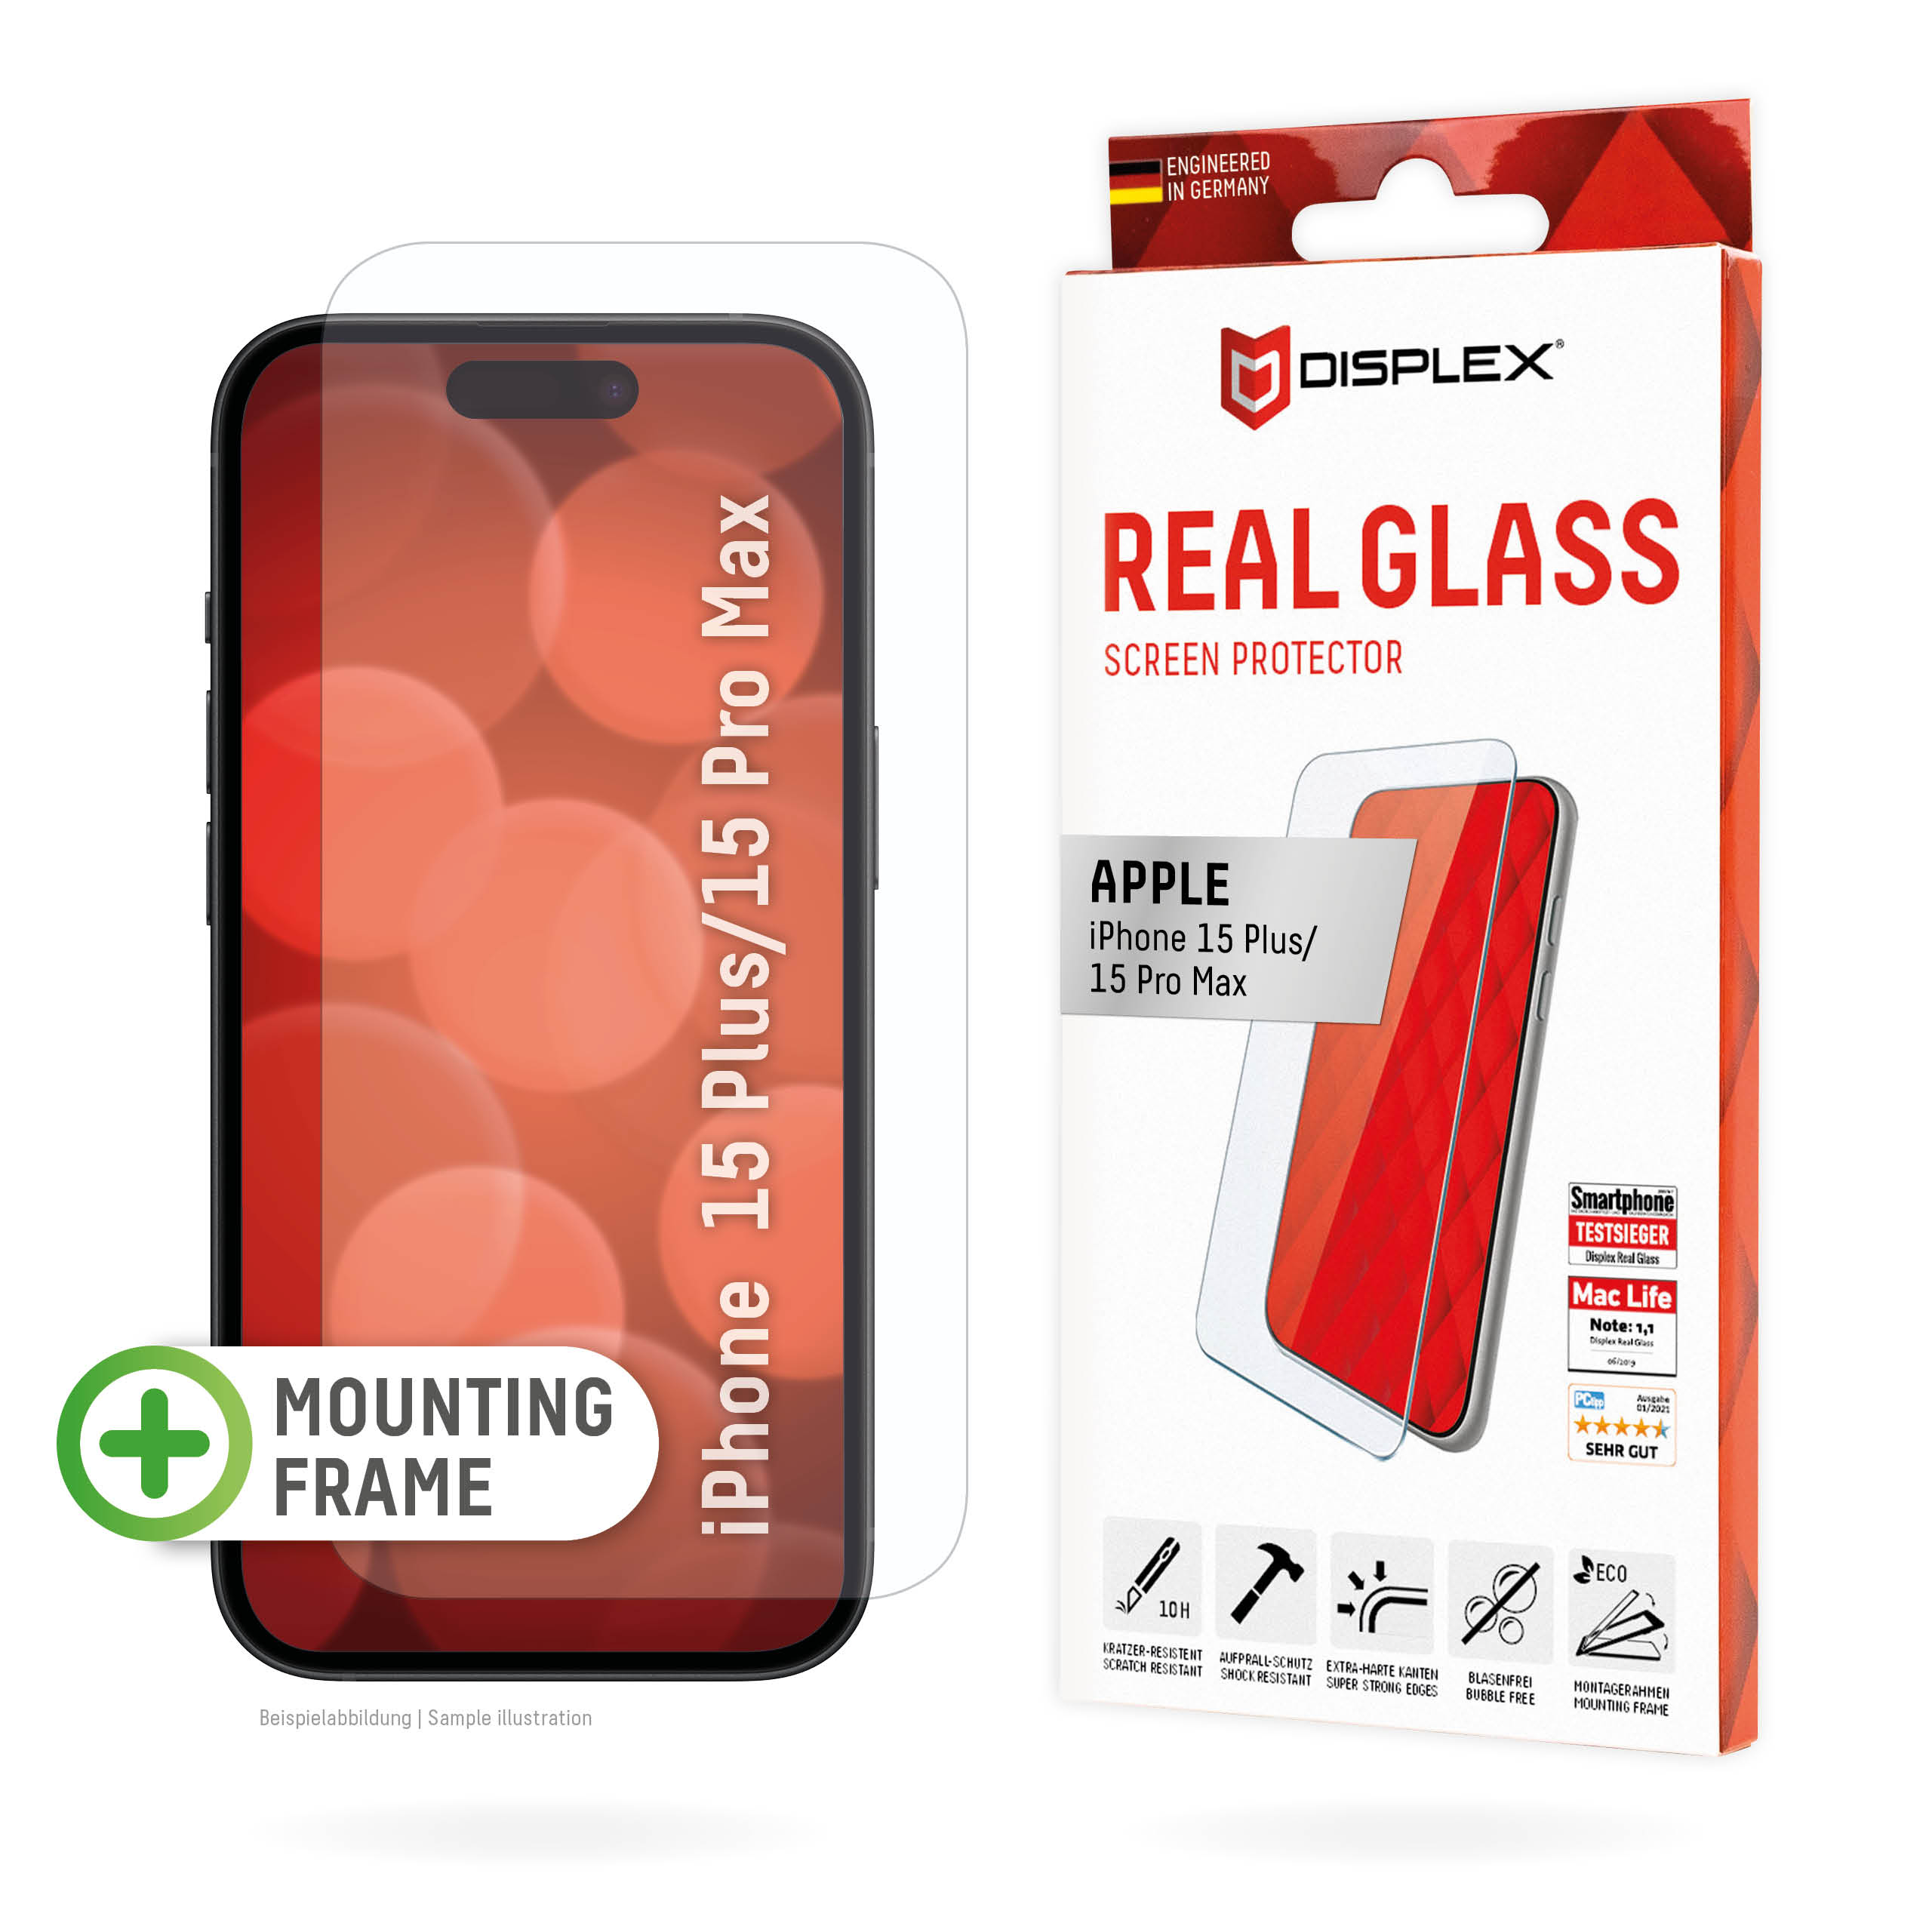 01841-APPLE-iPhone-15-Plus-15-Pro-Max-Real-Glass-2D_ENZ7BlImMOJt3wd